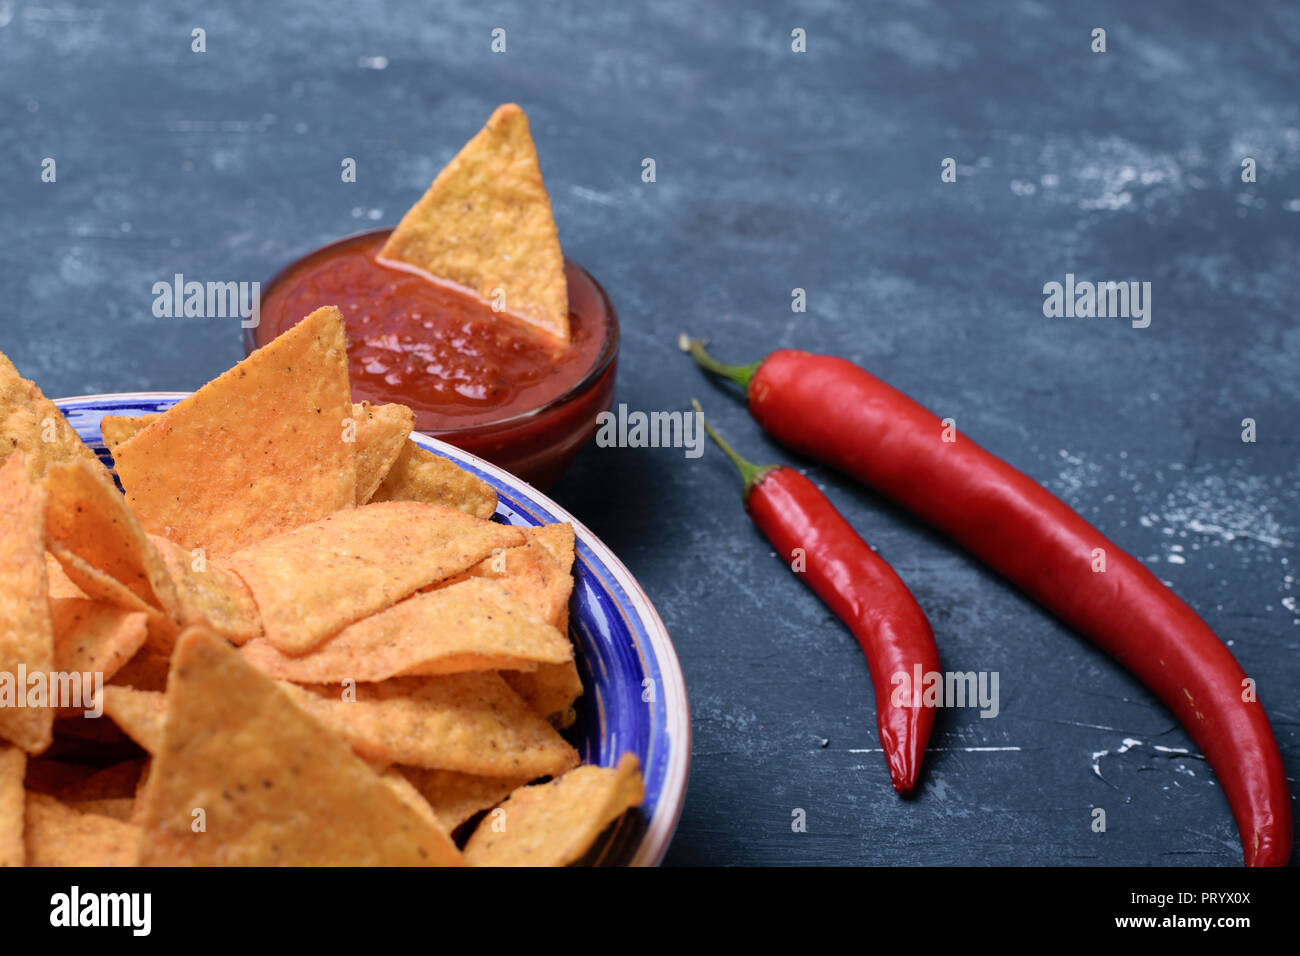 Tasty mexican tortilla chips with tomato salsa sauce on dark blue concrete background. Stock Photo